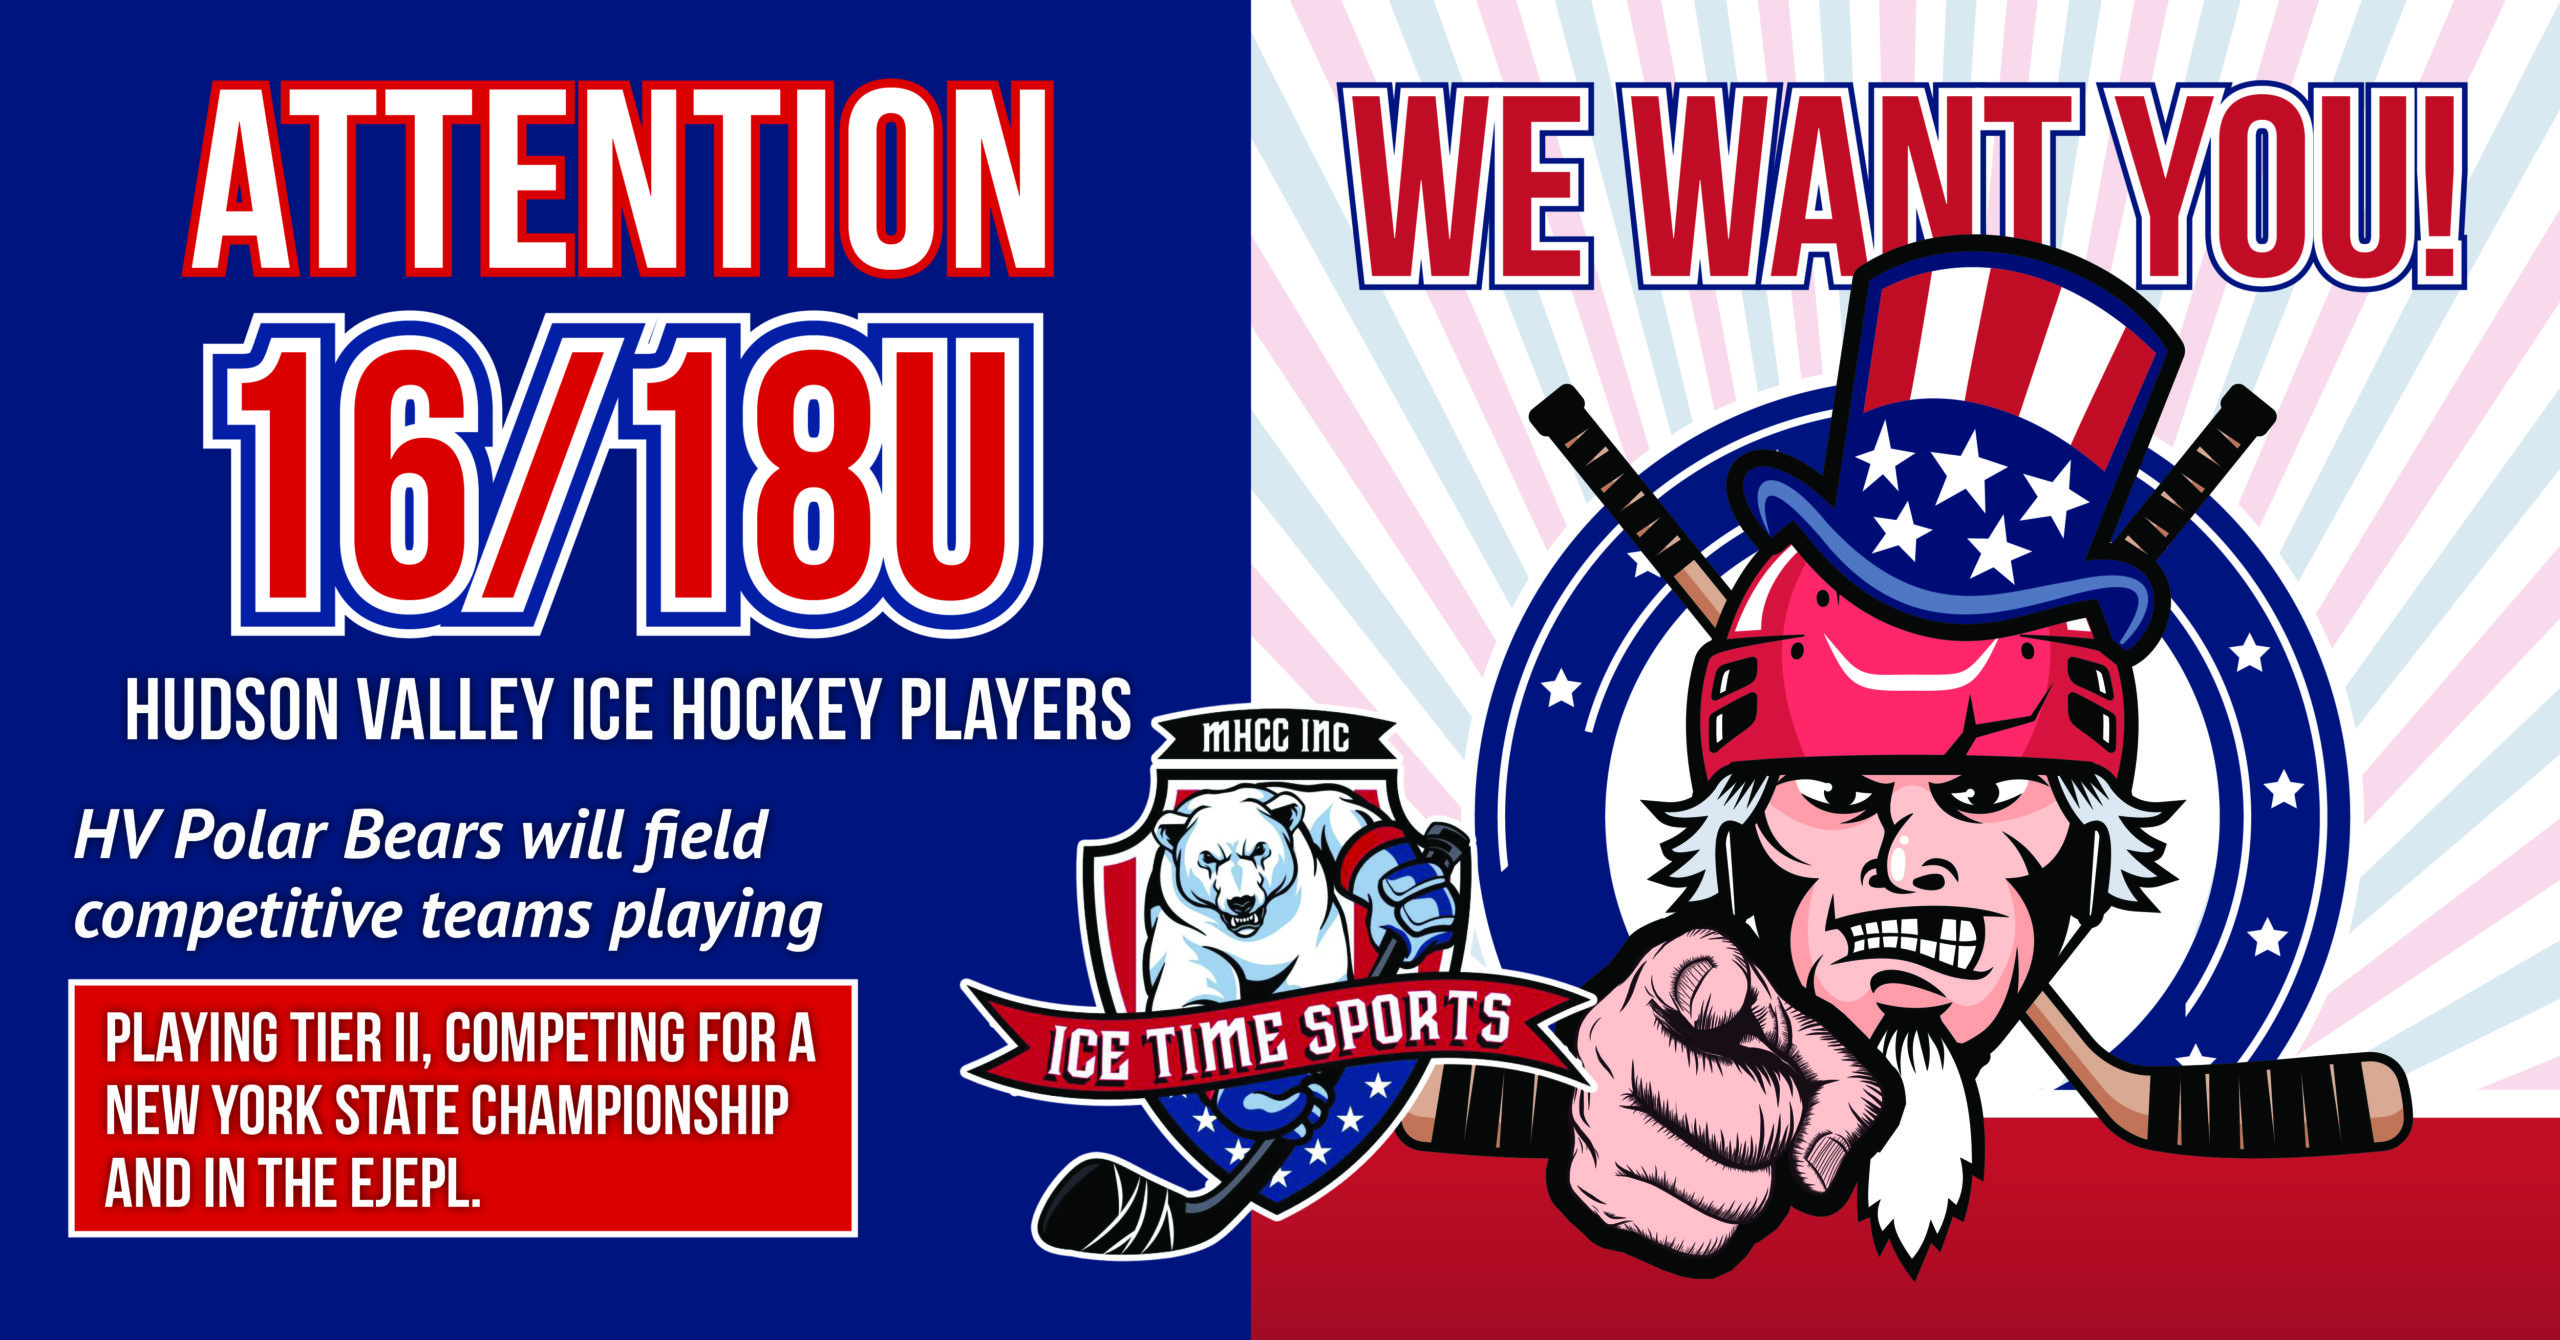 Attention 16/18U Hudson Valley Ice Hockey Players – WE WANT YOU!